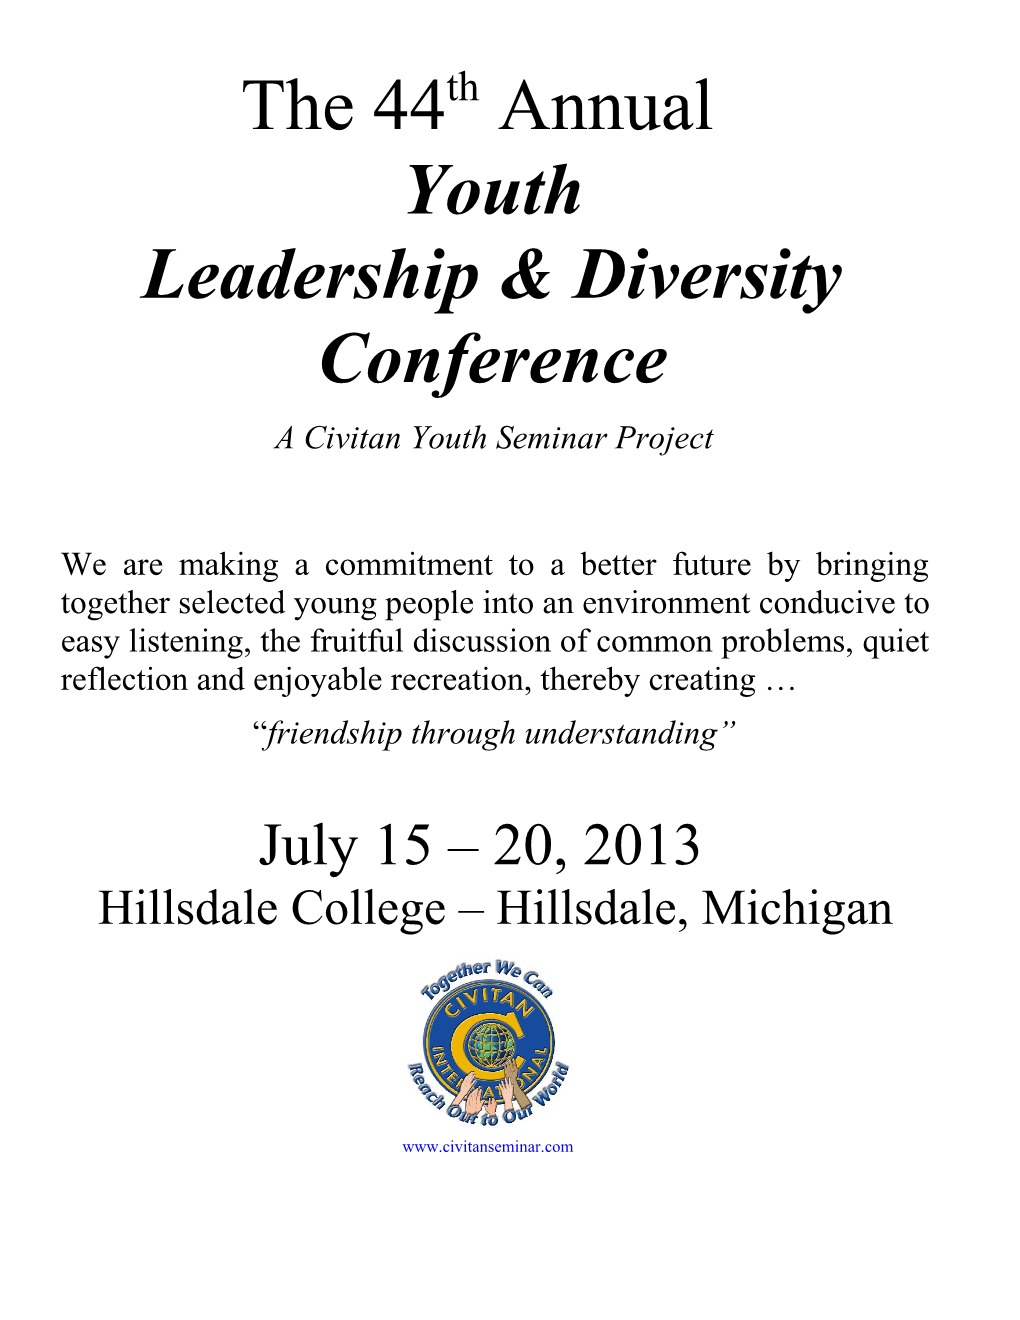 Youth Leadership & Diversity Conference